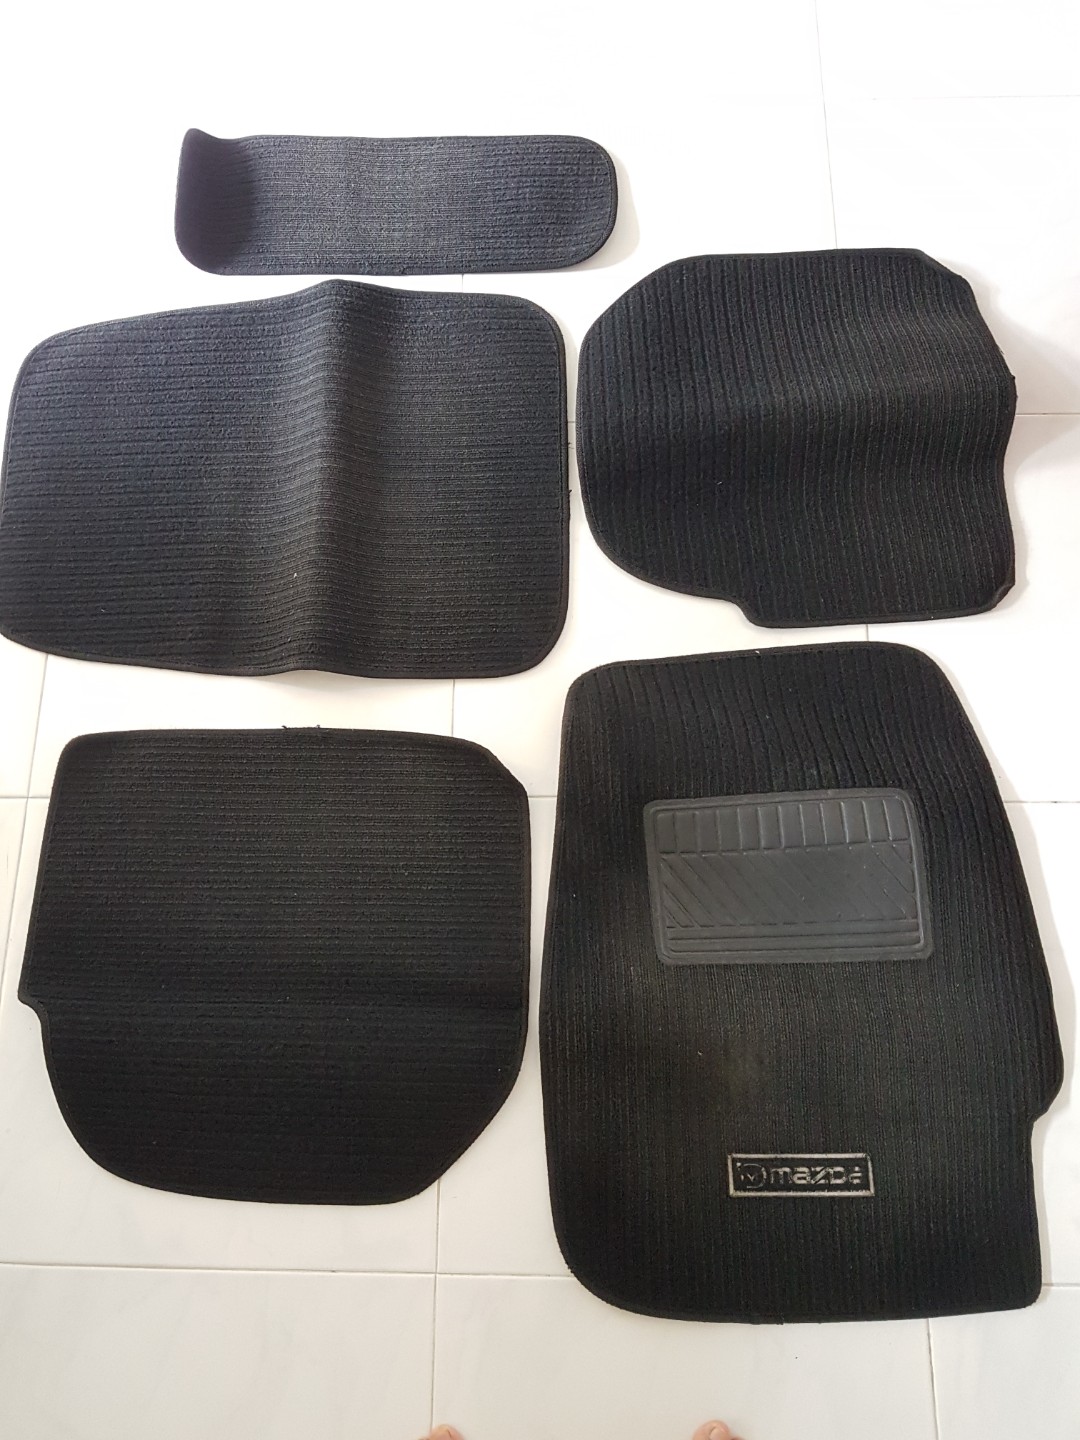 Mazda 3 Protege Car Mats Car Accessories Accessories On Carousell